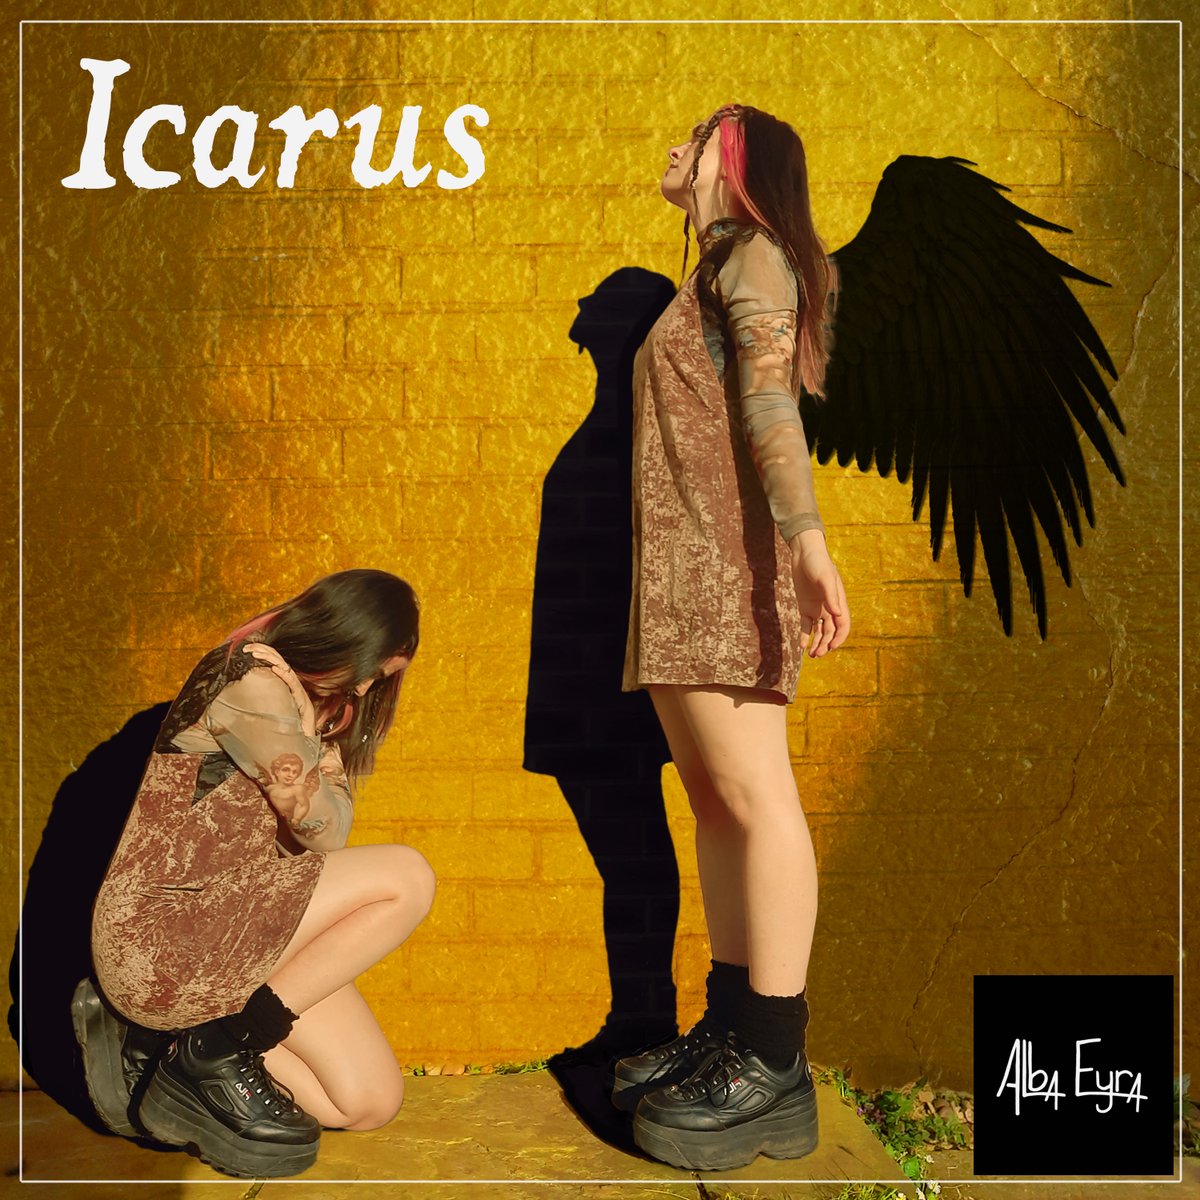 New release, out today! Fly free, 'Icarus' linktr.ee/AlbaEyra #Spotify #NewMusicFriday #AppleMusic @bbcintrobristol